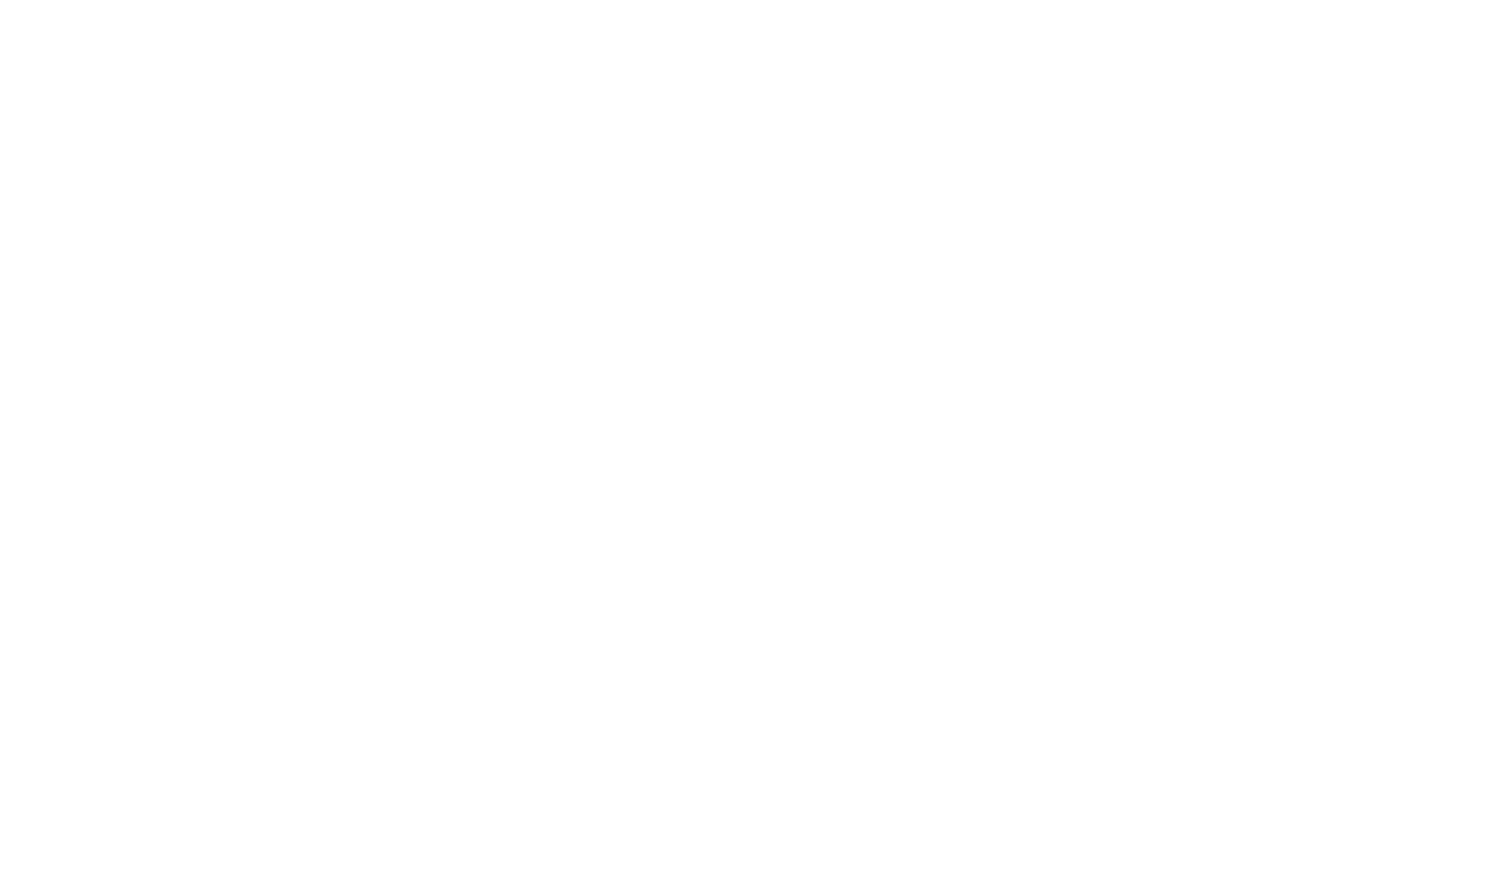 Lydian Collective